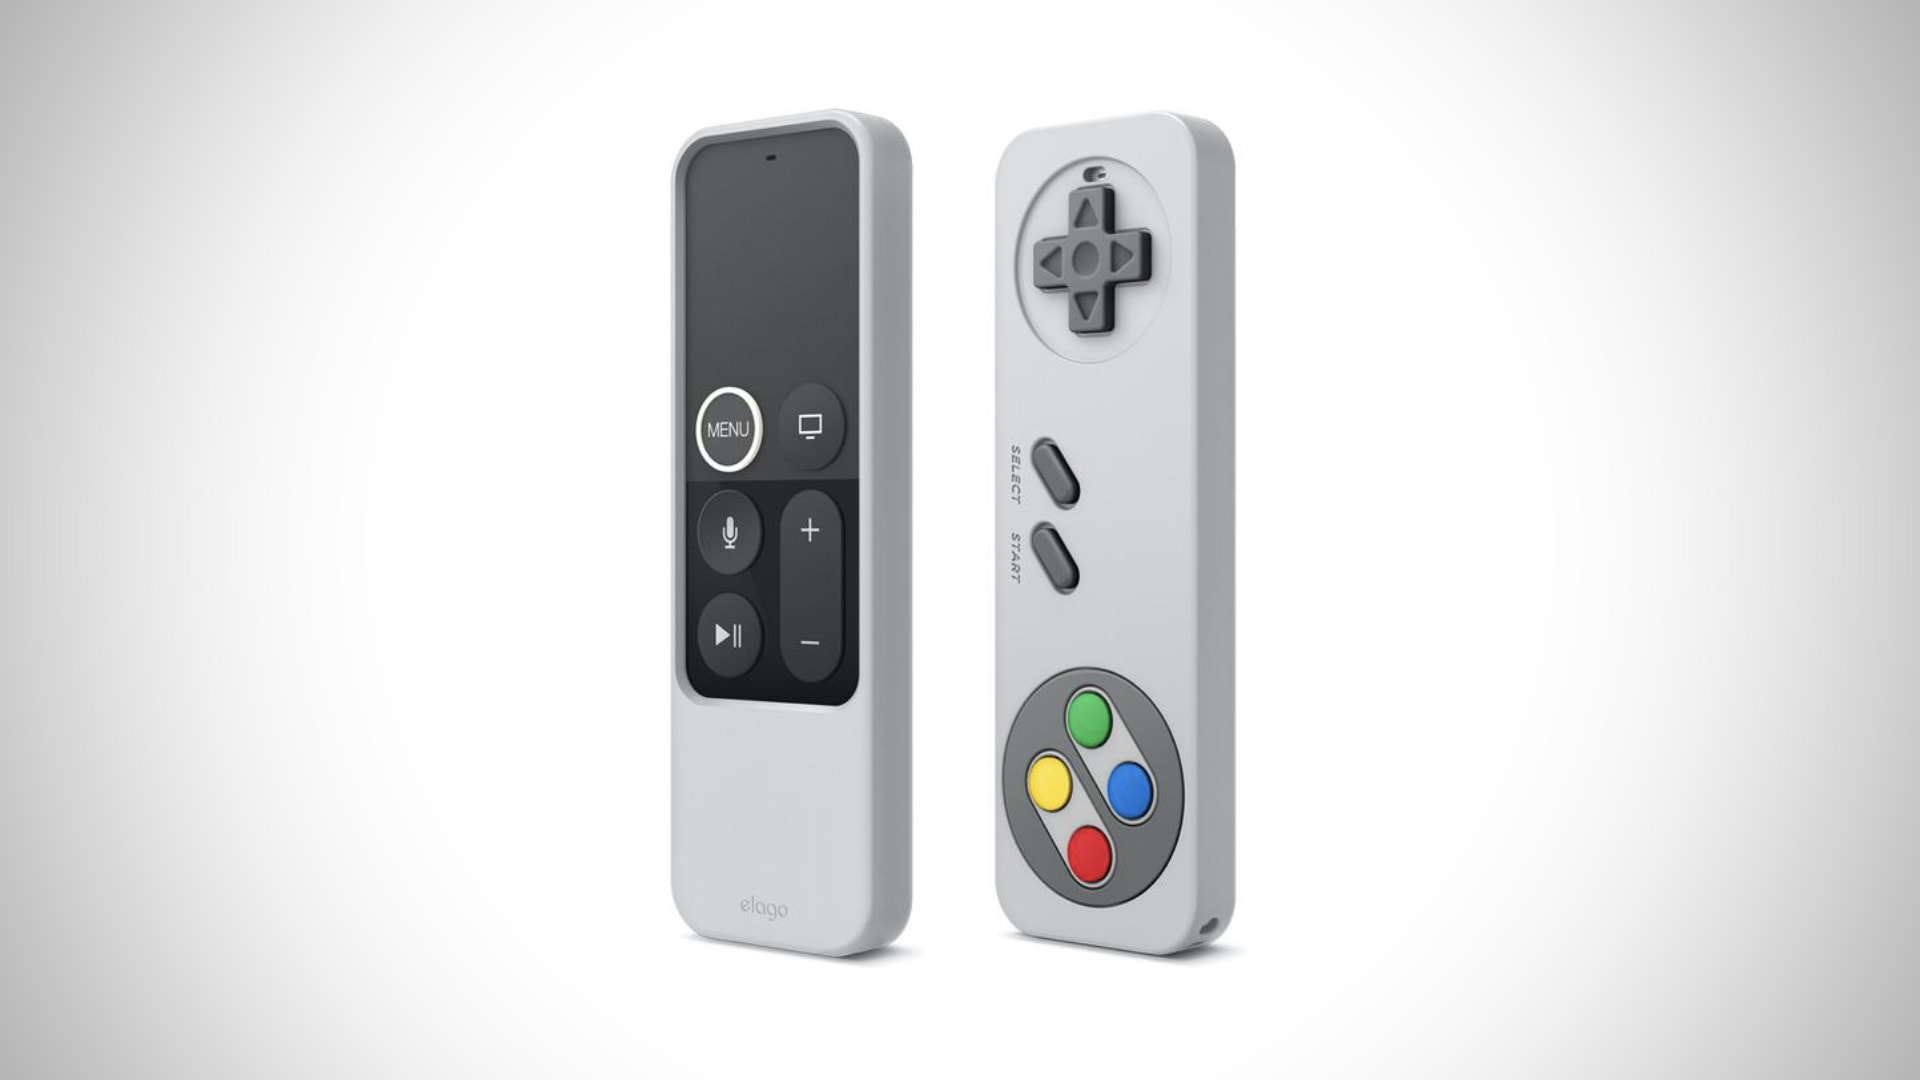 Make your Apple TV remote look like a classic game controller with an Elago R4 case for Apple TV remote